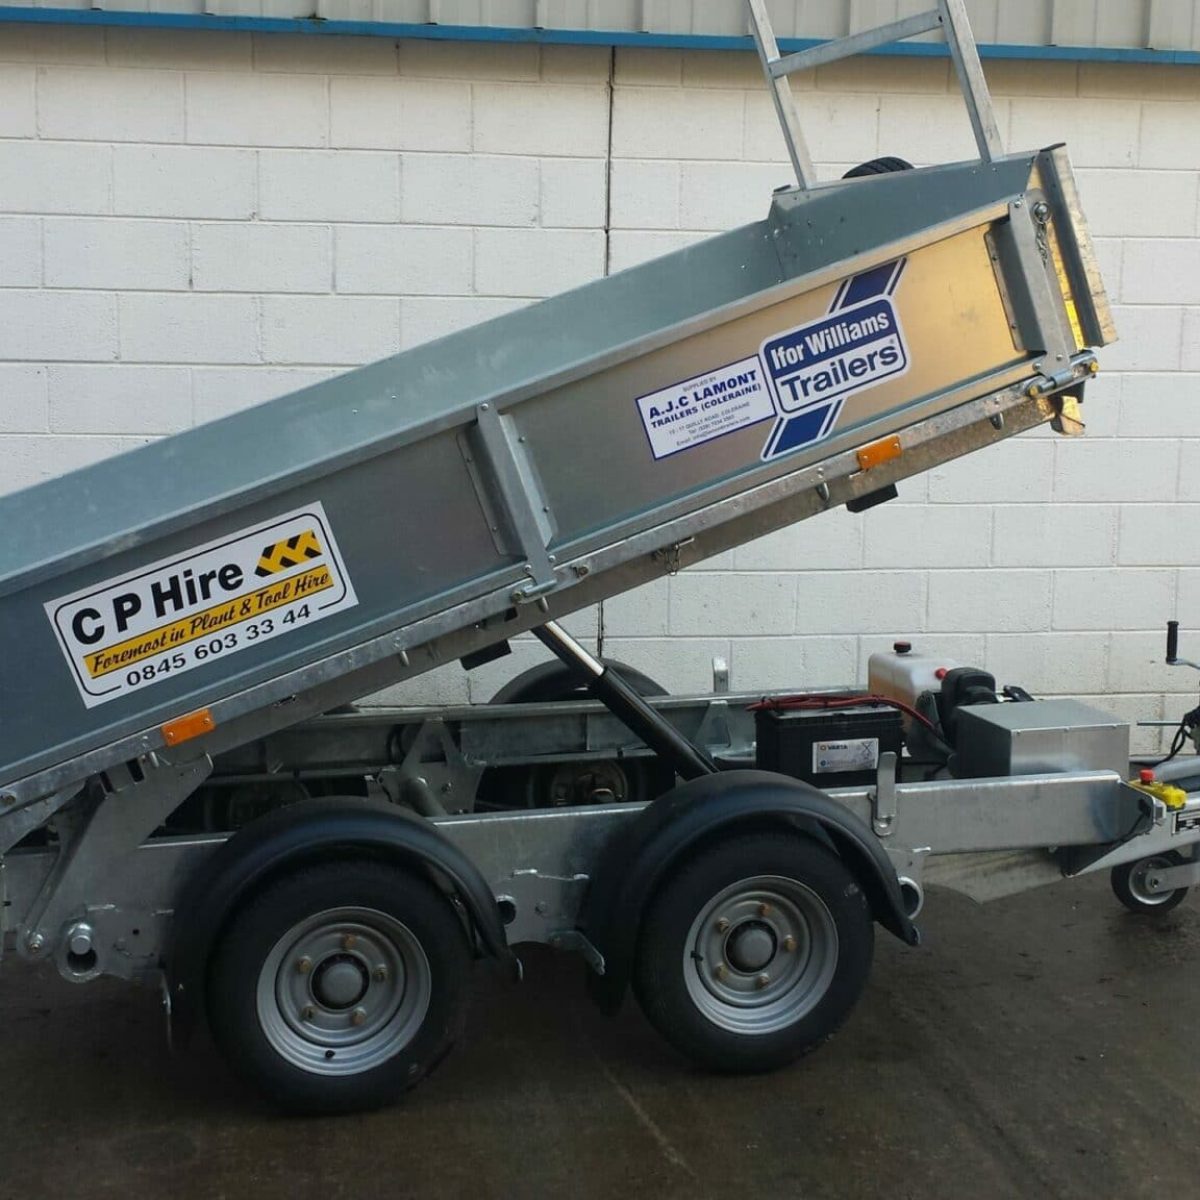 TIPPING TRAILER